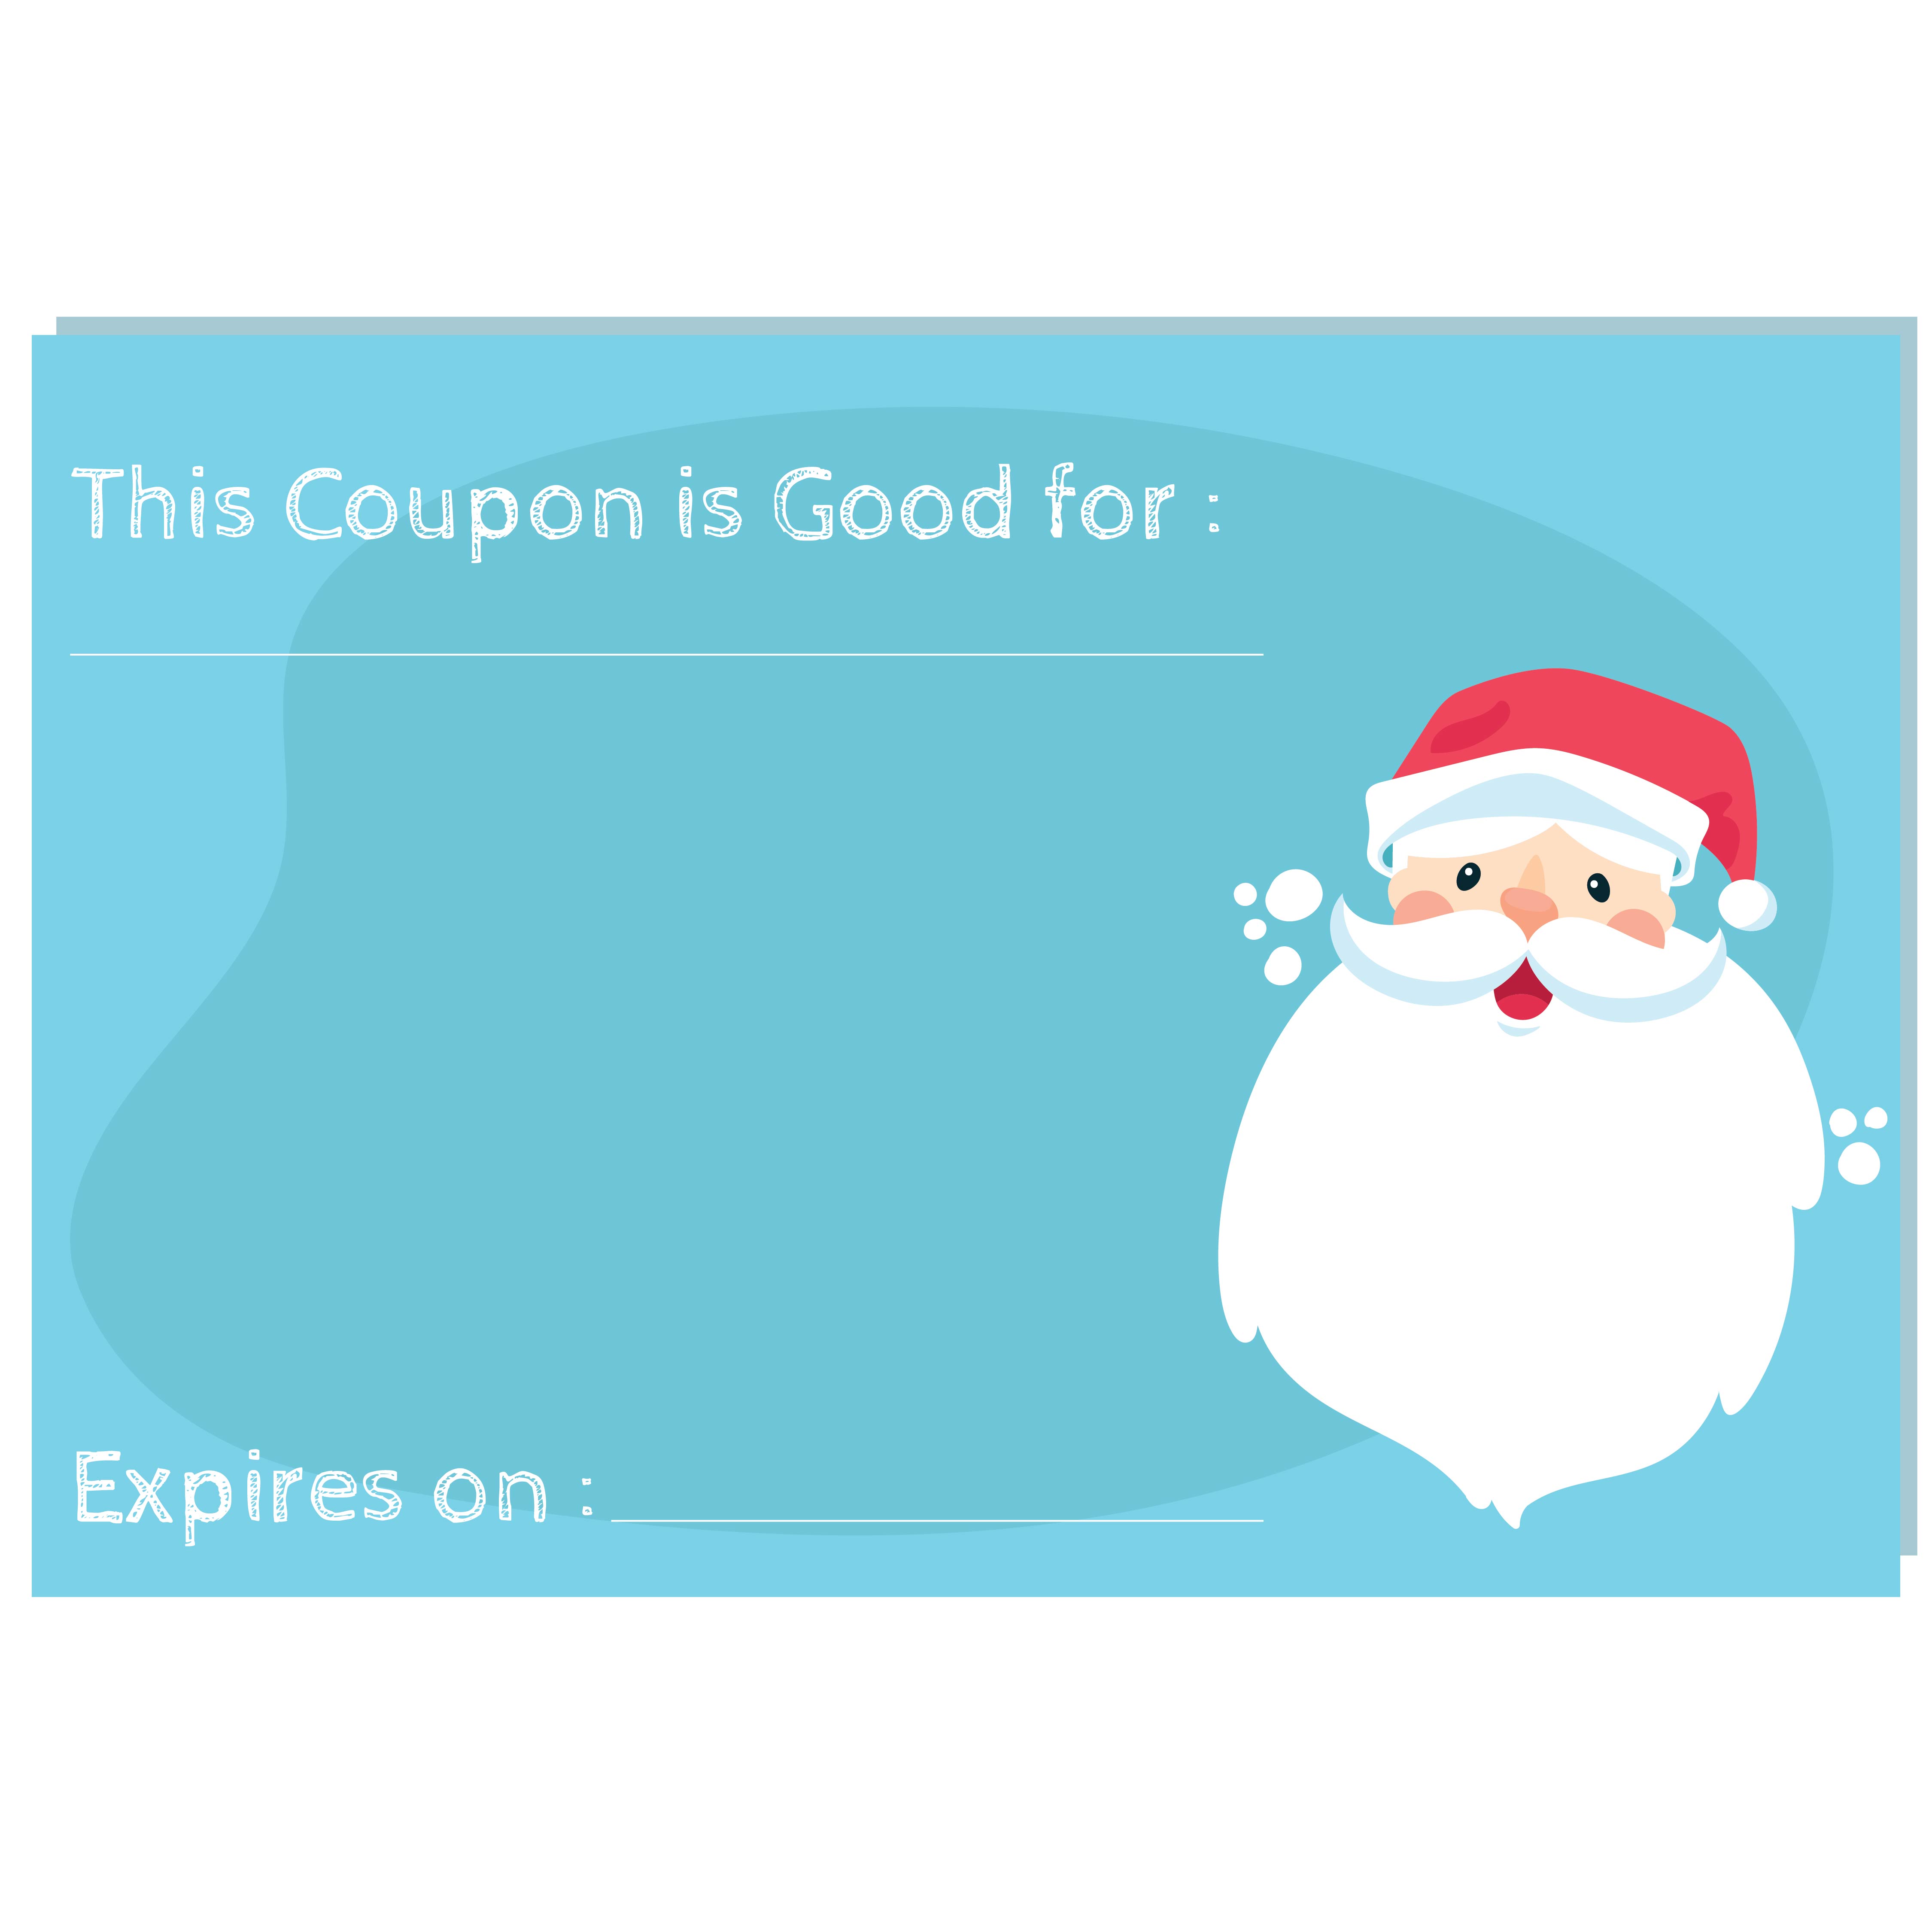 10 Best Printable Christmas Voucher Templates PDF for Free at Printablee